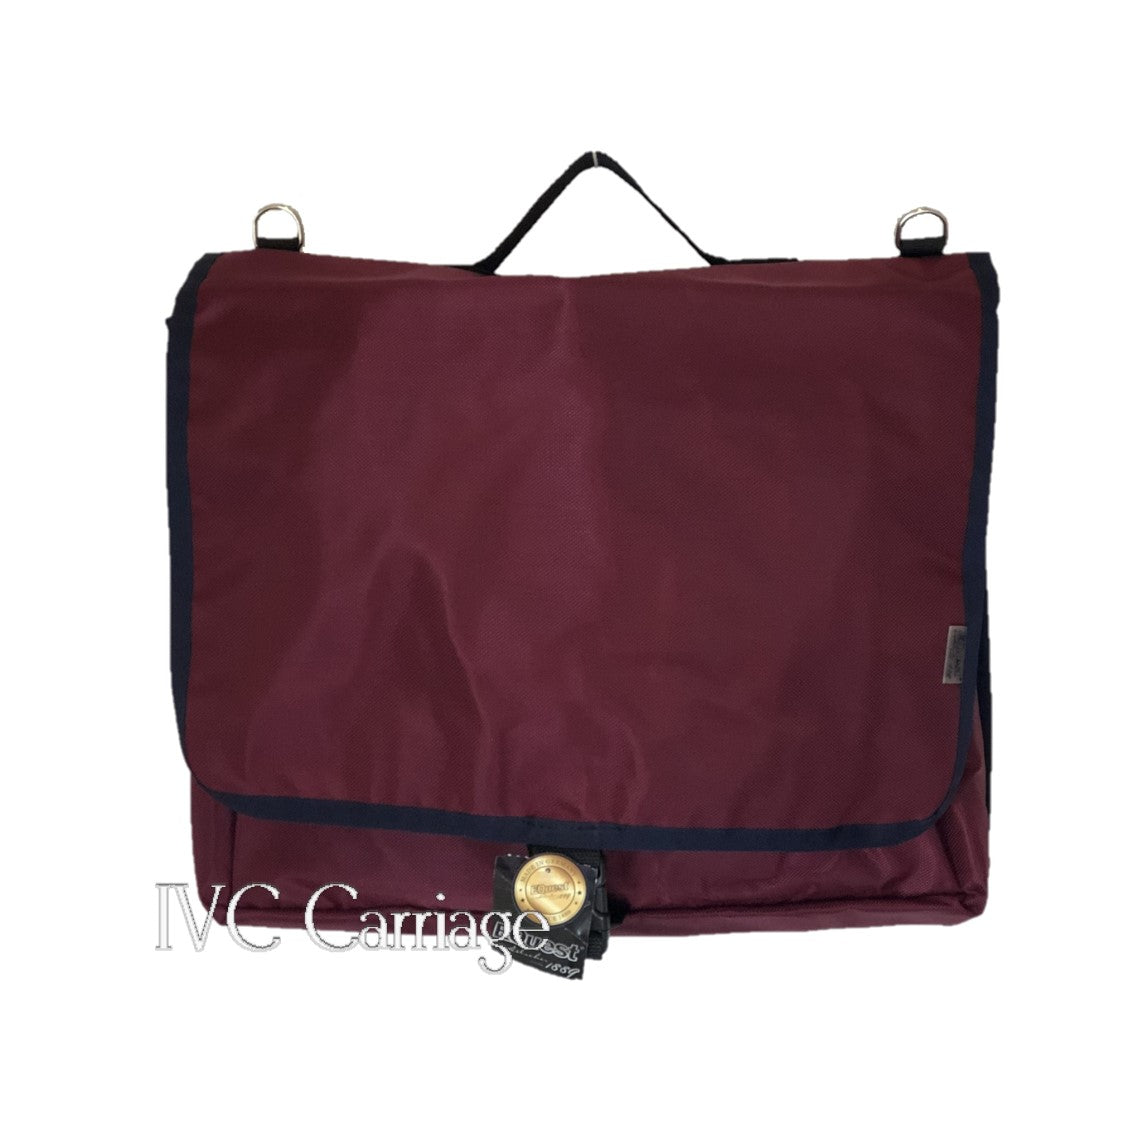 Horse Stall Bag | IVC Carriage